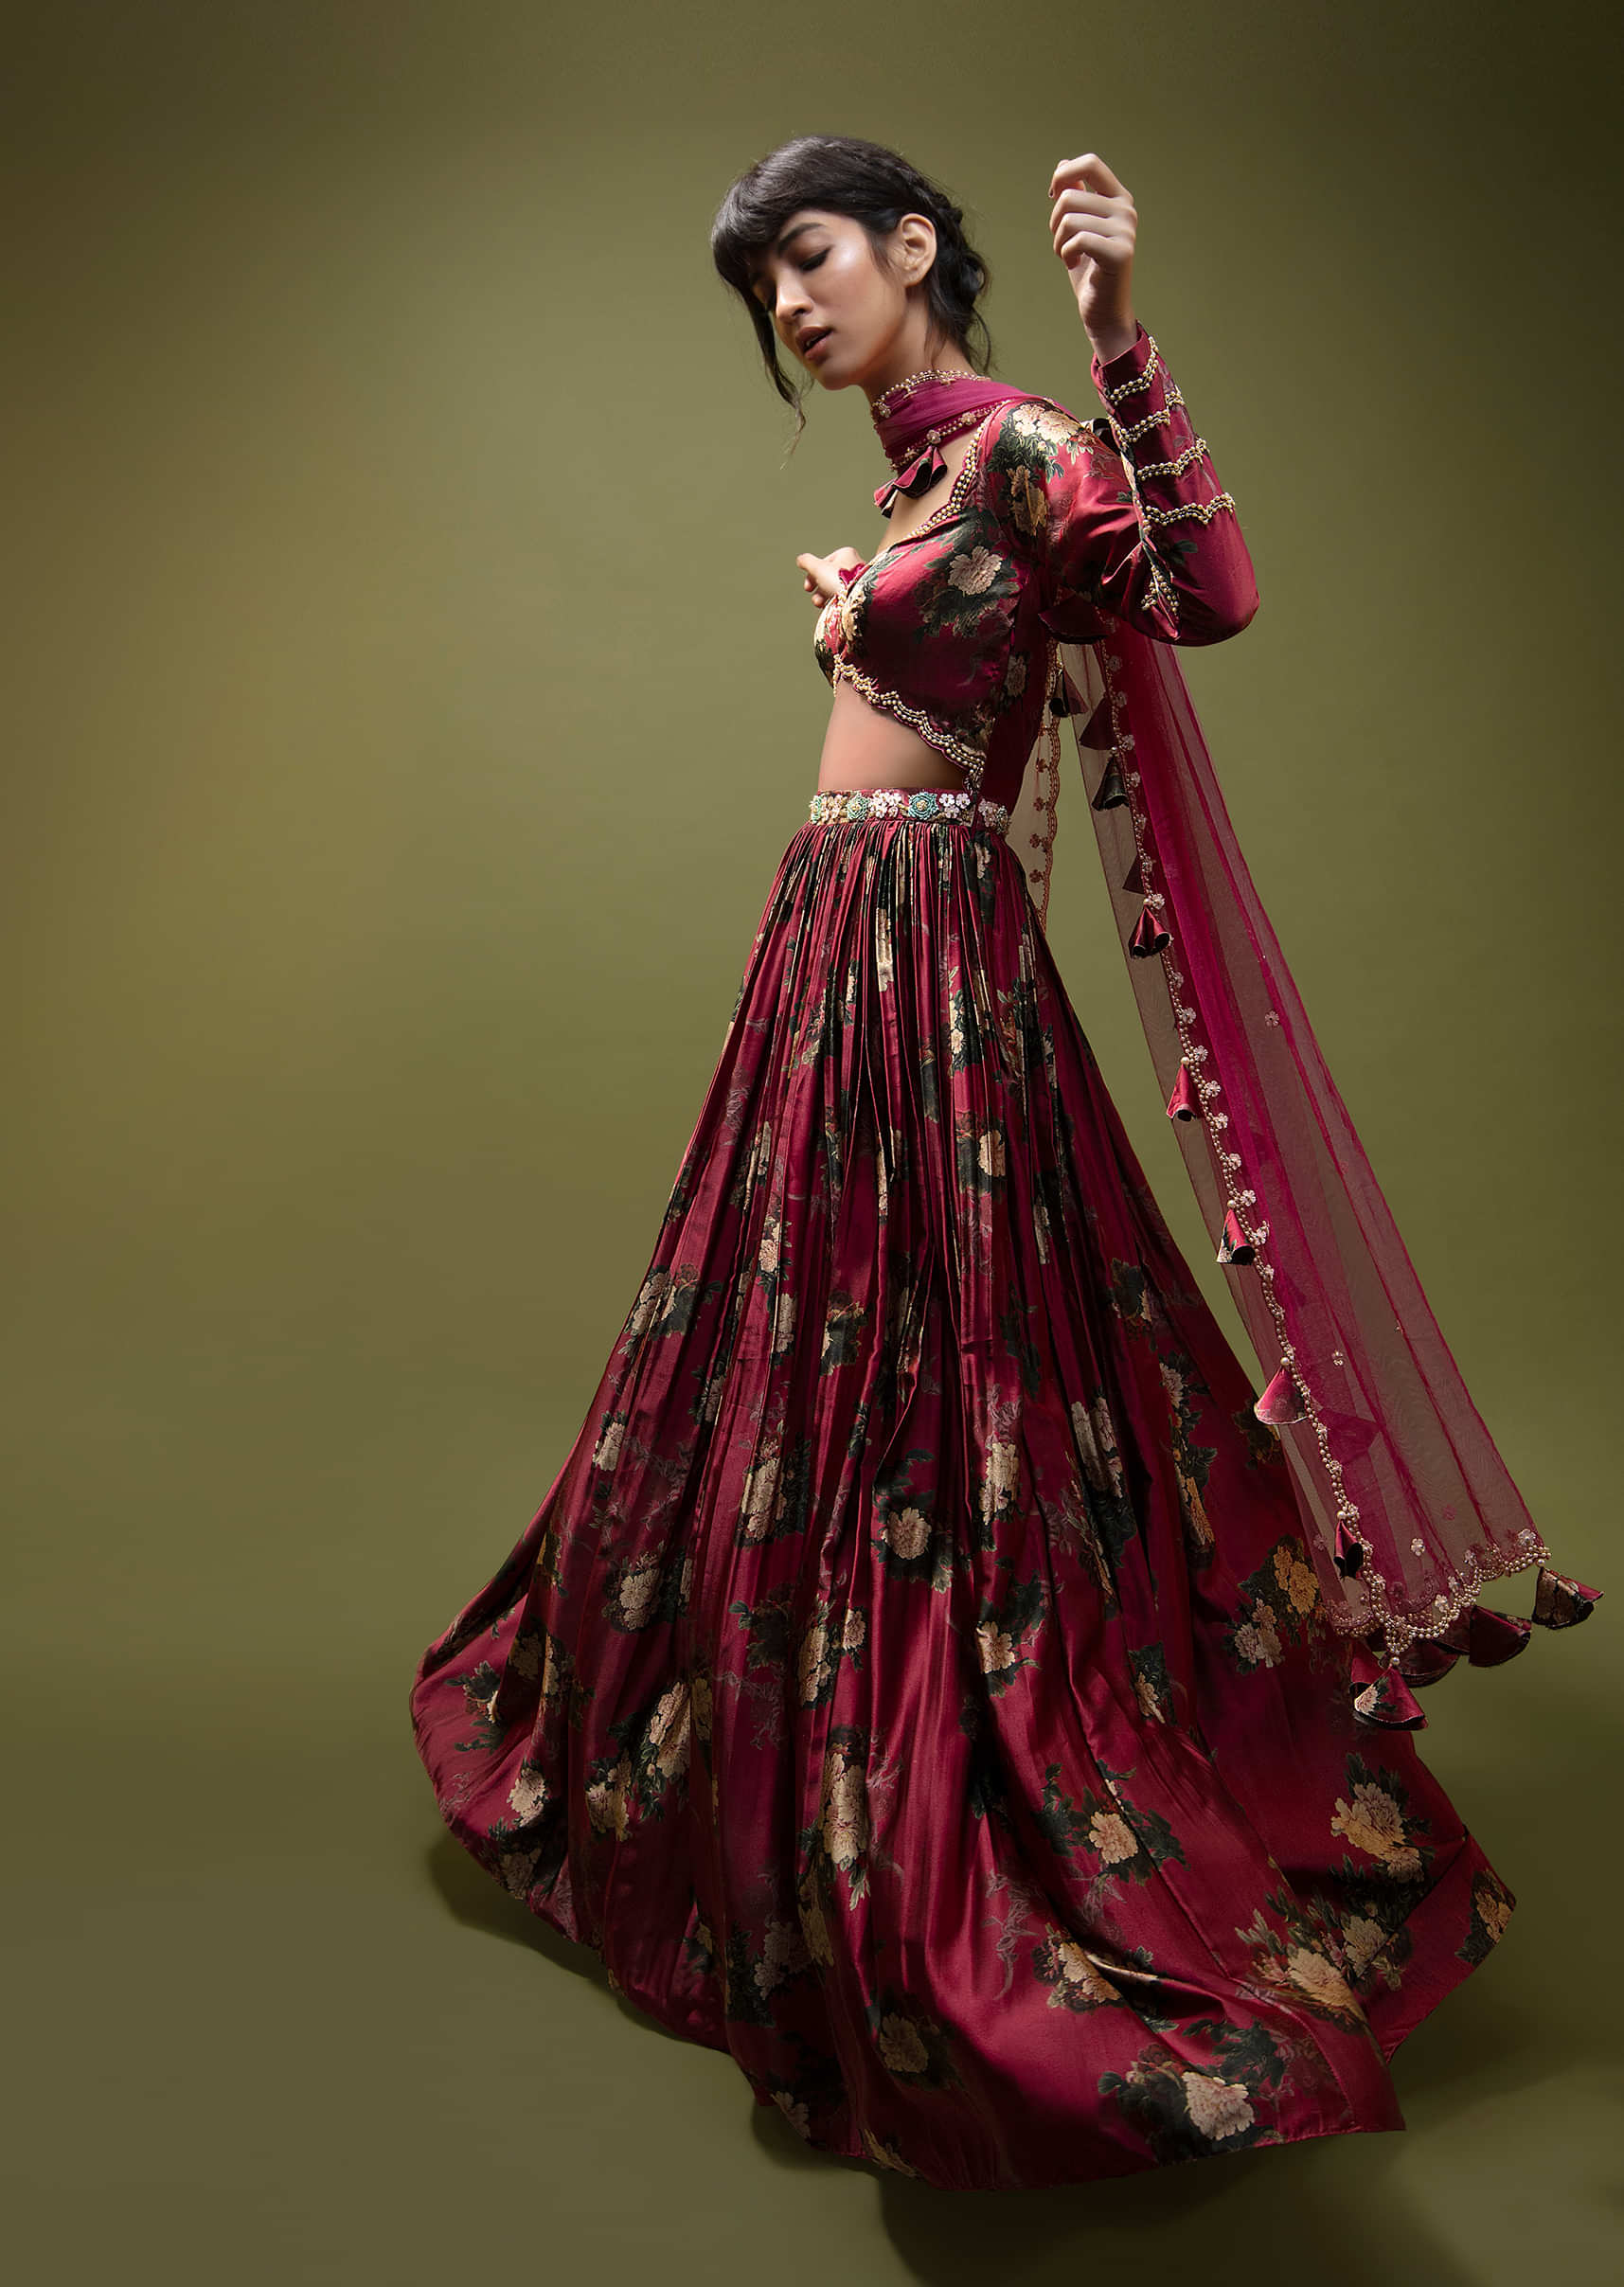 Cranberry Red Anarkali Suit In Floral Printed Satin With Front Cut Out And Sequin Embroidery  